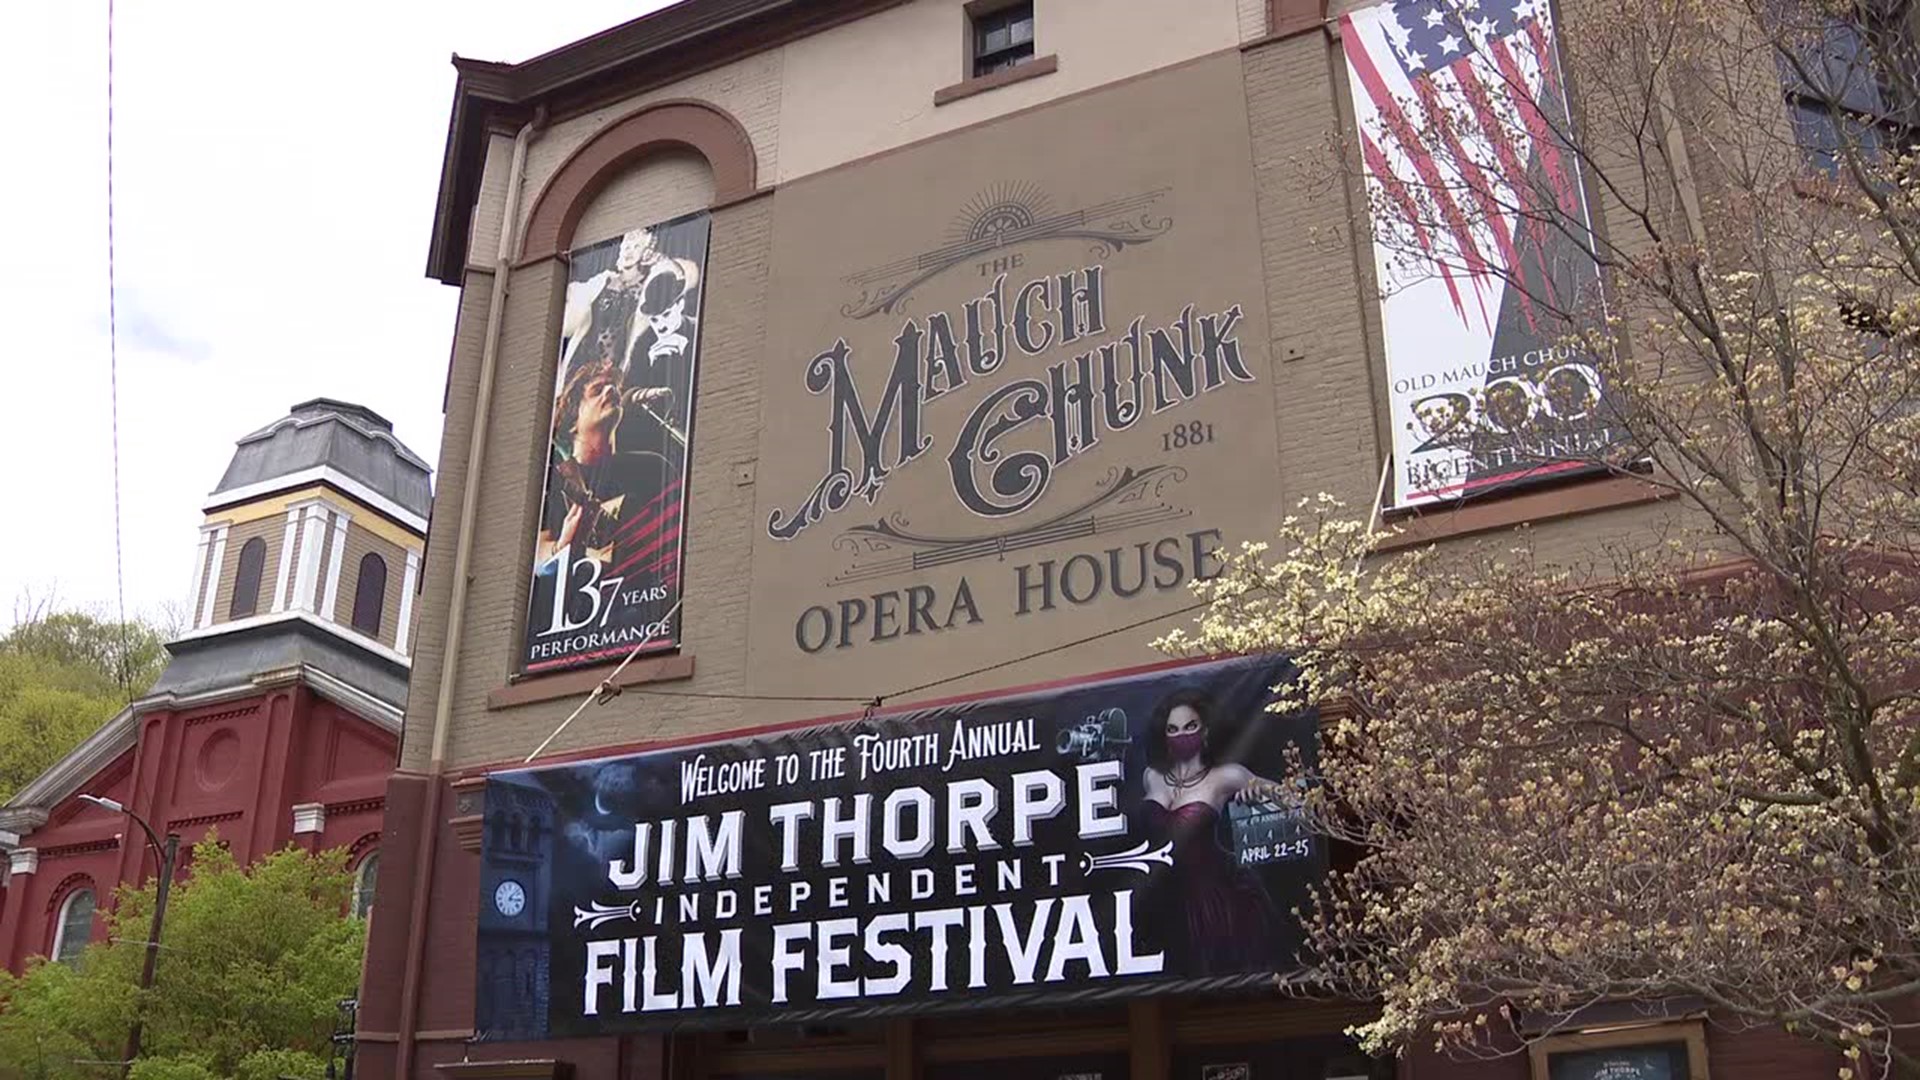 The Jim Thorpe Independent Film Festival takes place Thursday through Sunday at the Mauch Chunk Opera House.